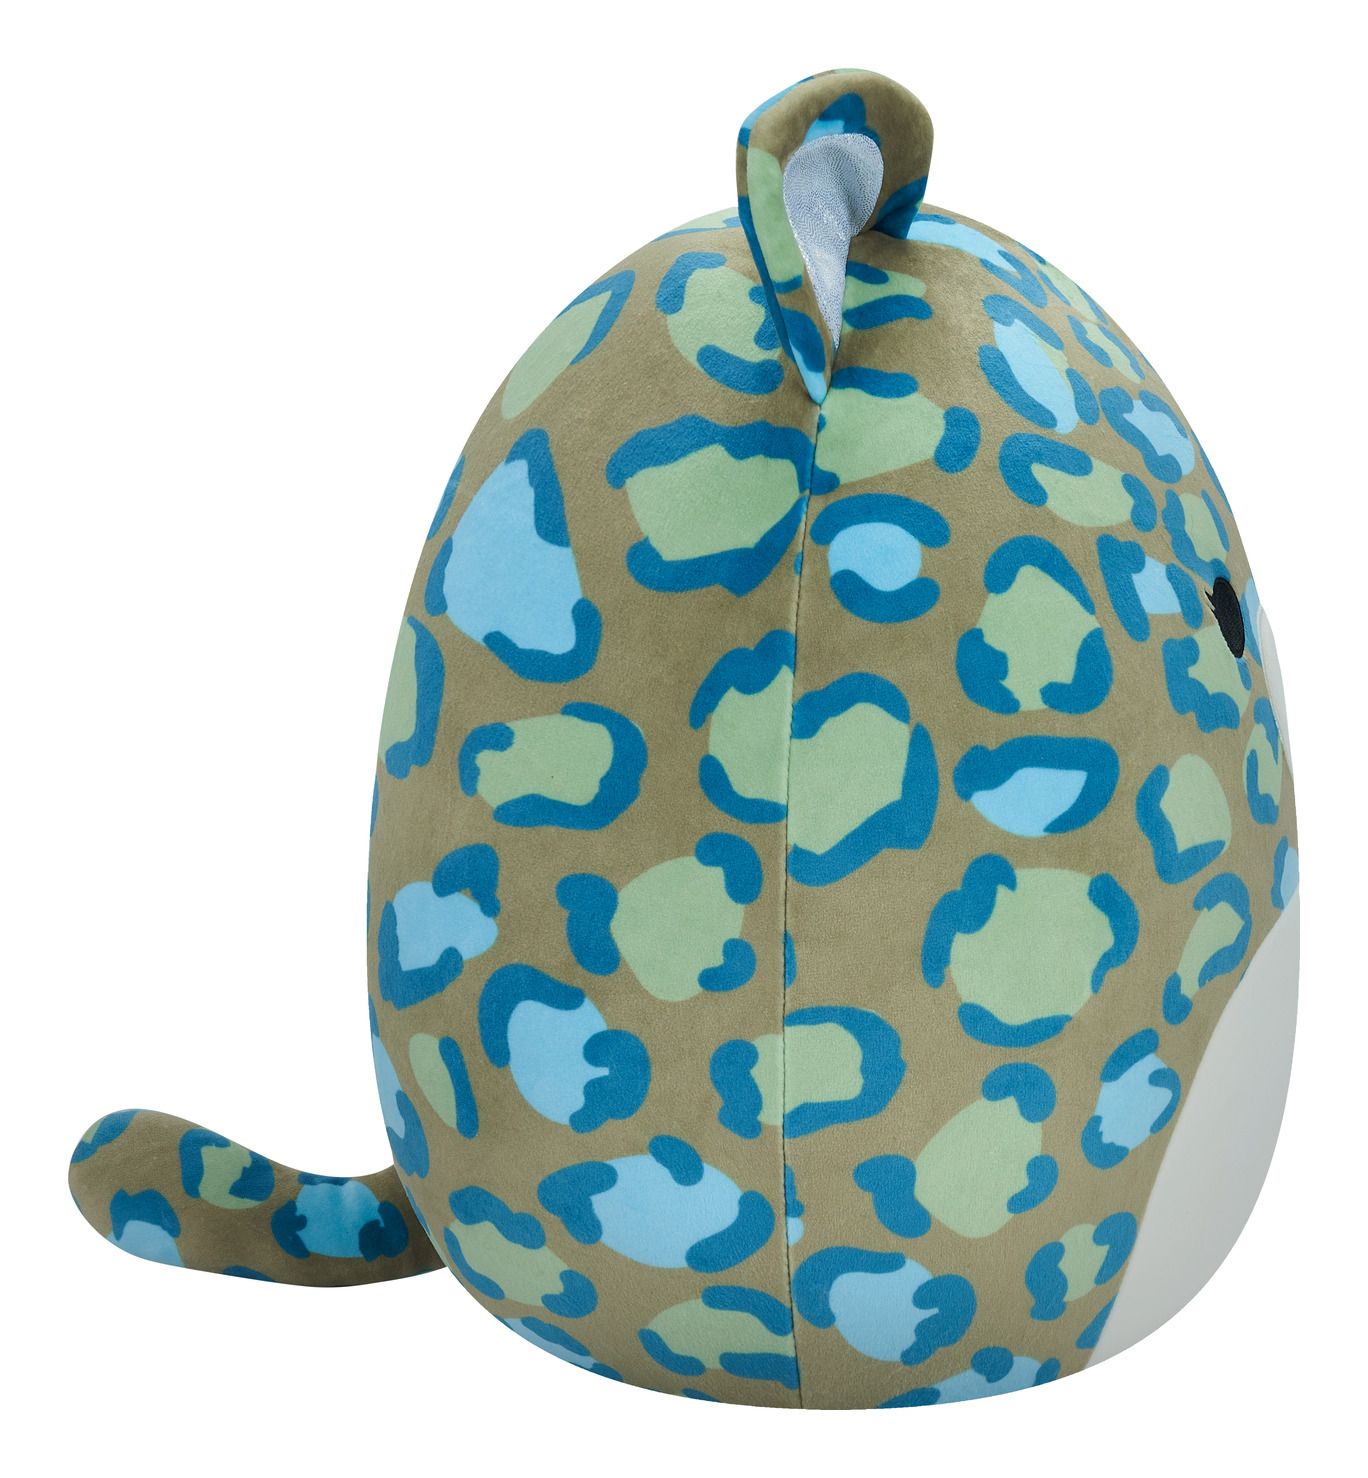 Enos the Dark Green Leopard is an adorable 12" Squishmallows plush made from high quality materials.